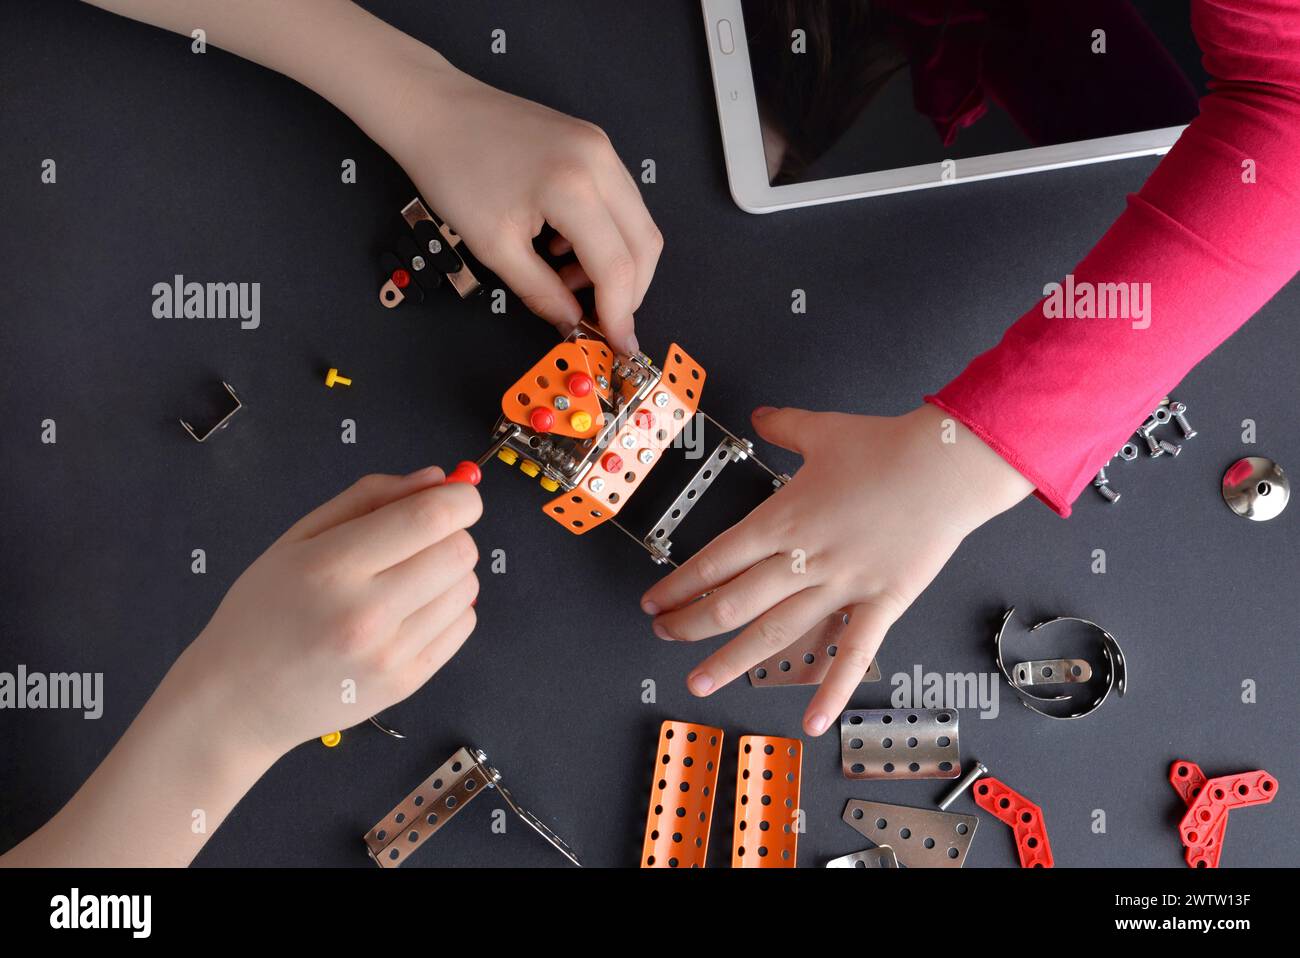 Children piece together robot from small metal parts and screws. Highlighting  learning, teamwork, creativity, and interactive engagement Stock Photo